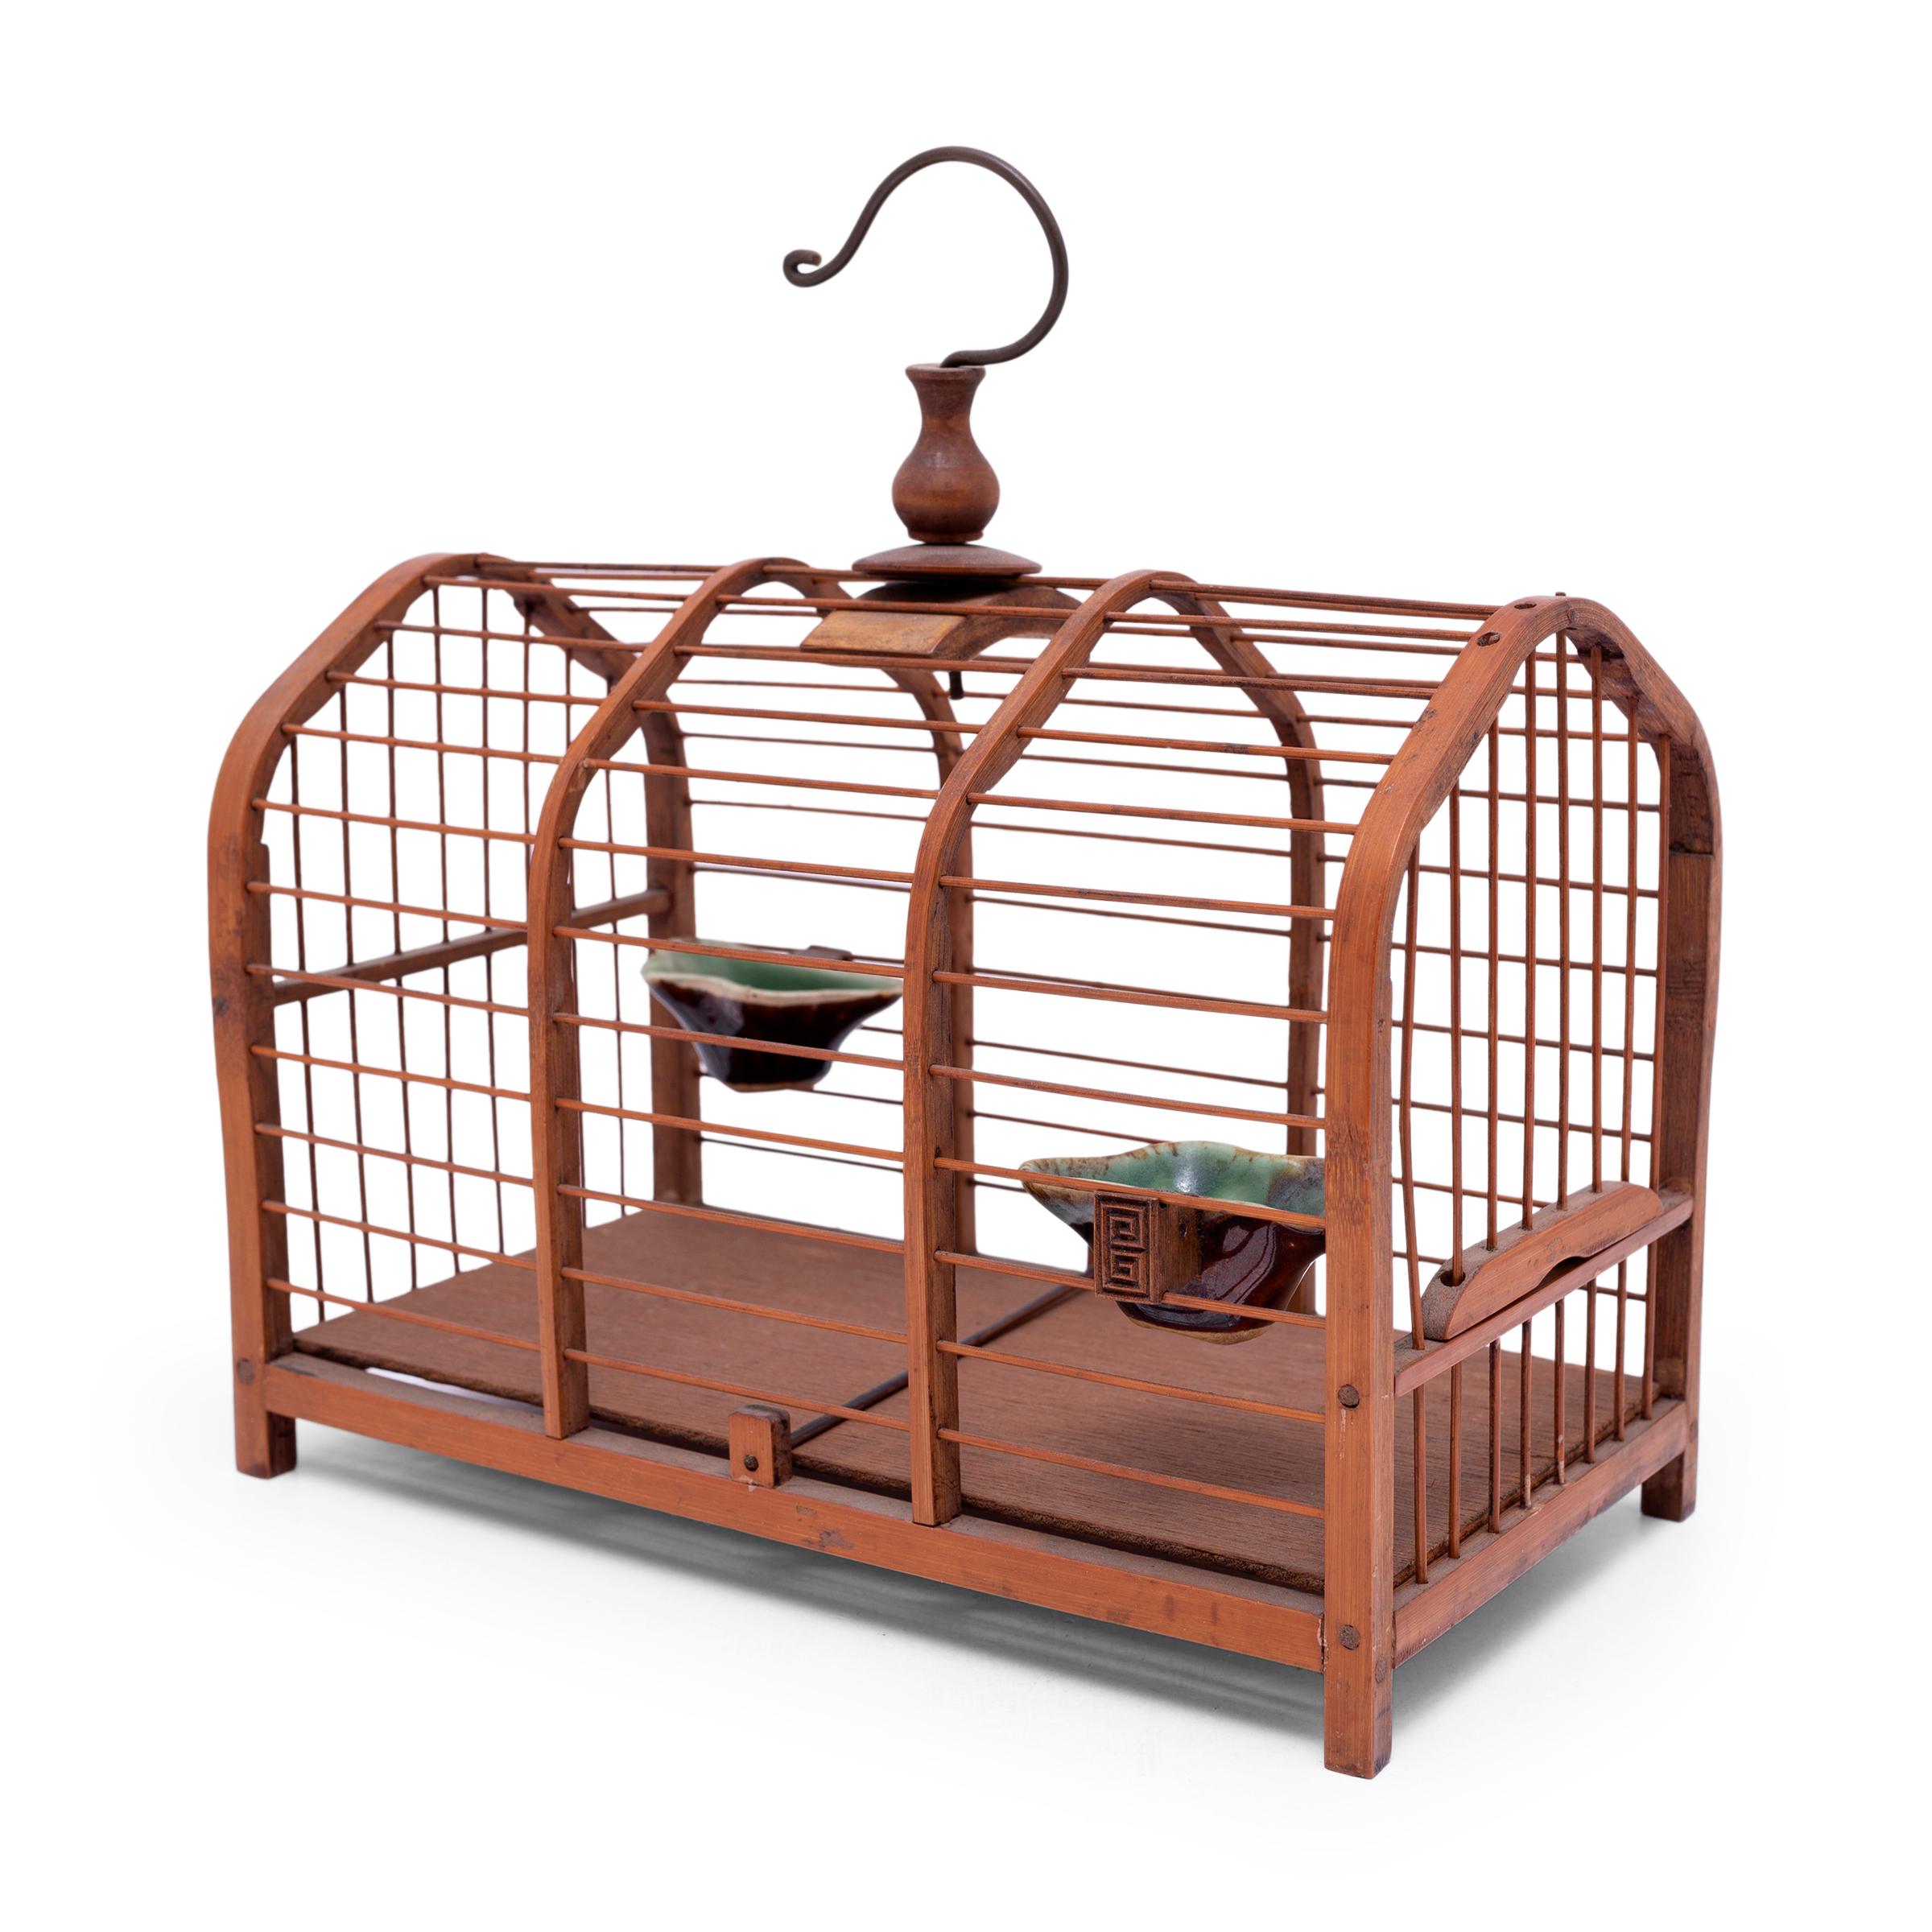 This petite bamboo birdcage was once home to the tiny pet bird of a Qing-dynasty aristocrat. Dated to the turn of the century, the birdcage is carefully assembled of thin bamboo rods set into an elongated frame with an adjustable opening at one end.